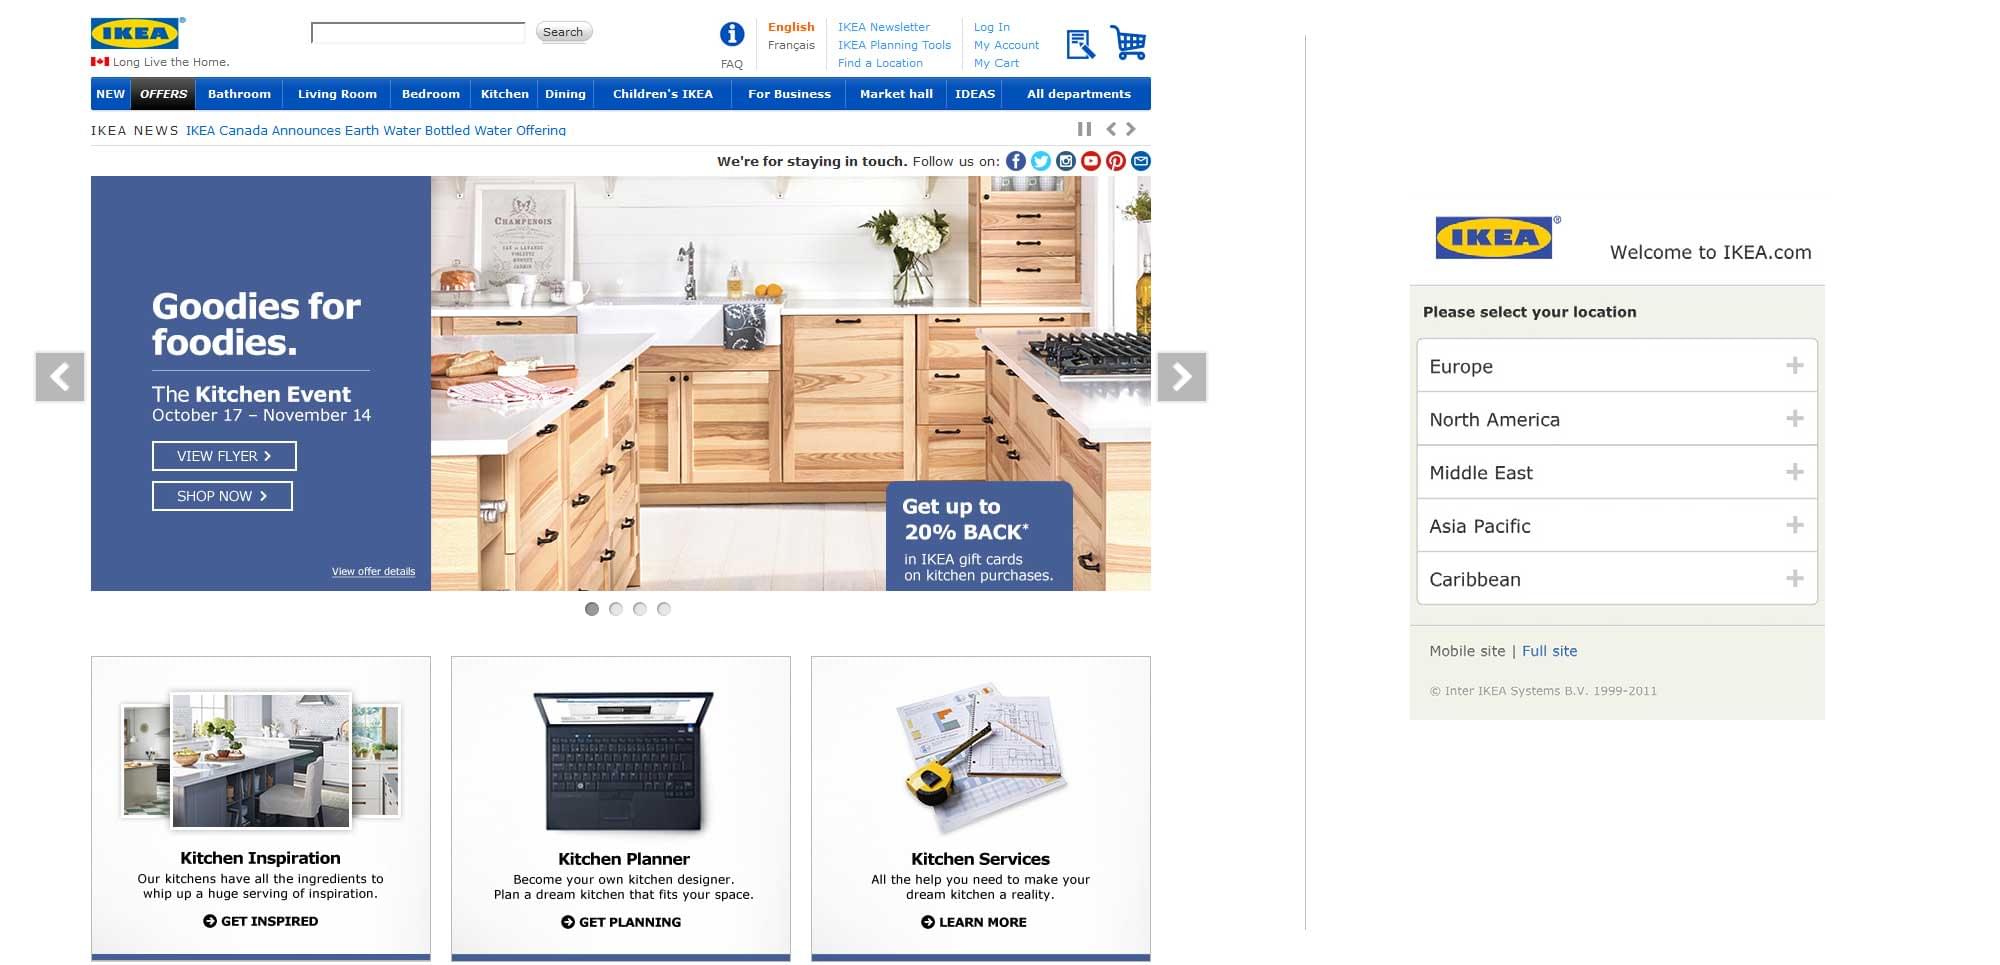 An image comparing the Ikea desktop and mobile landing pages